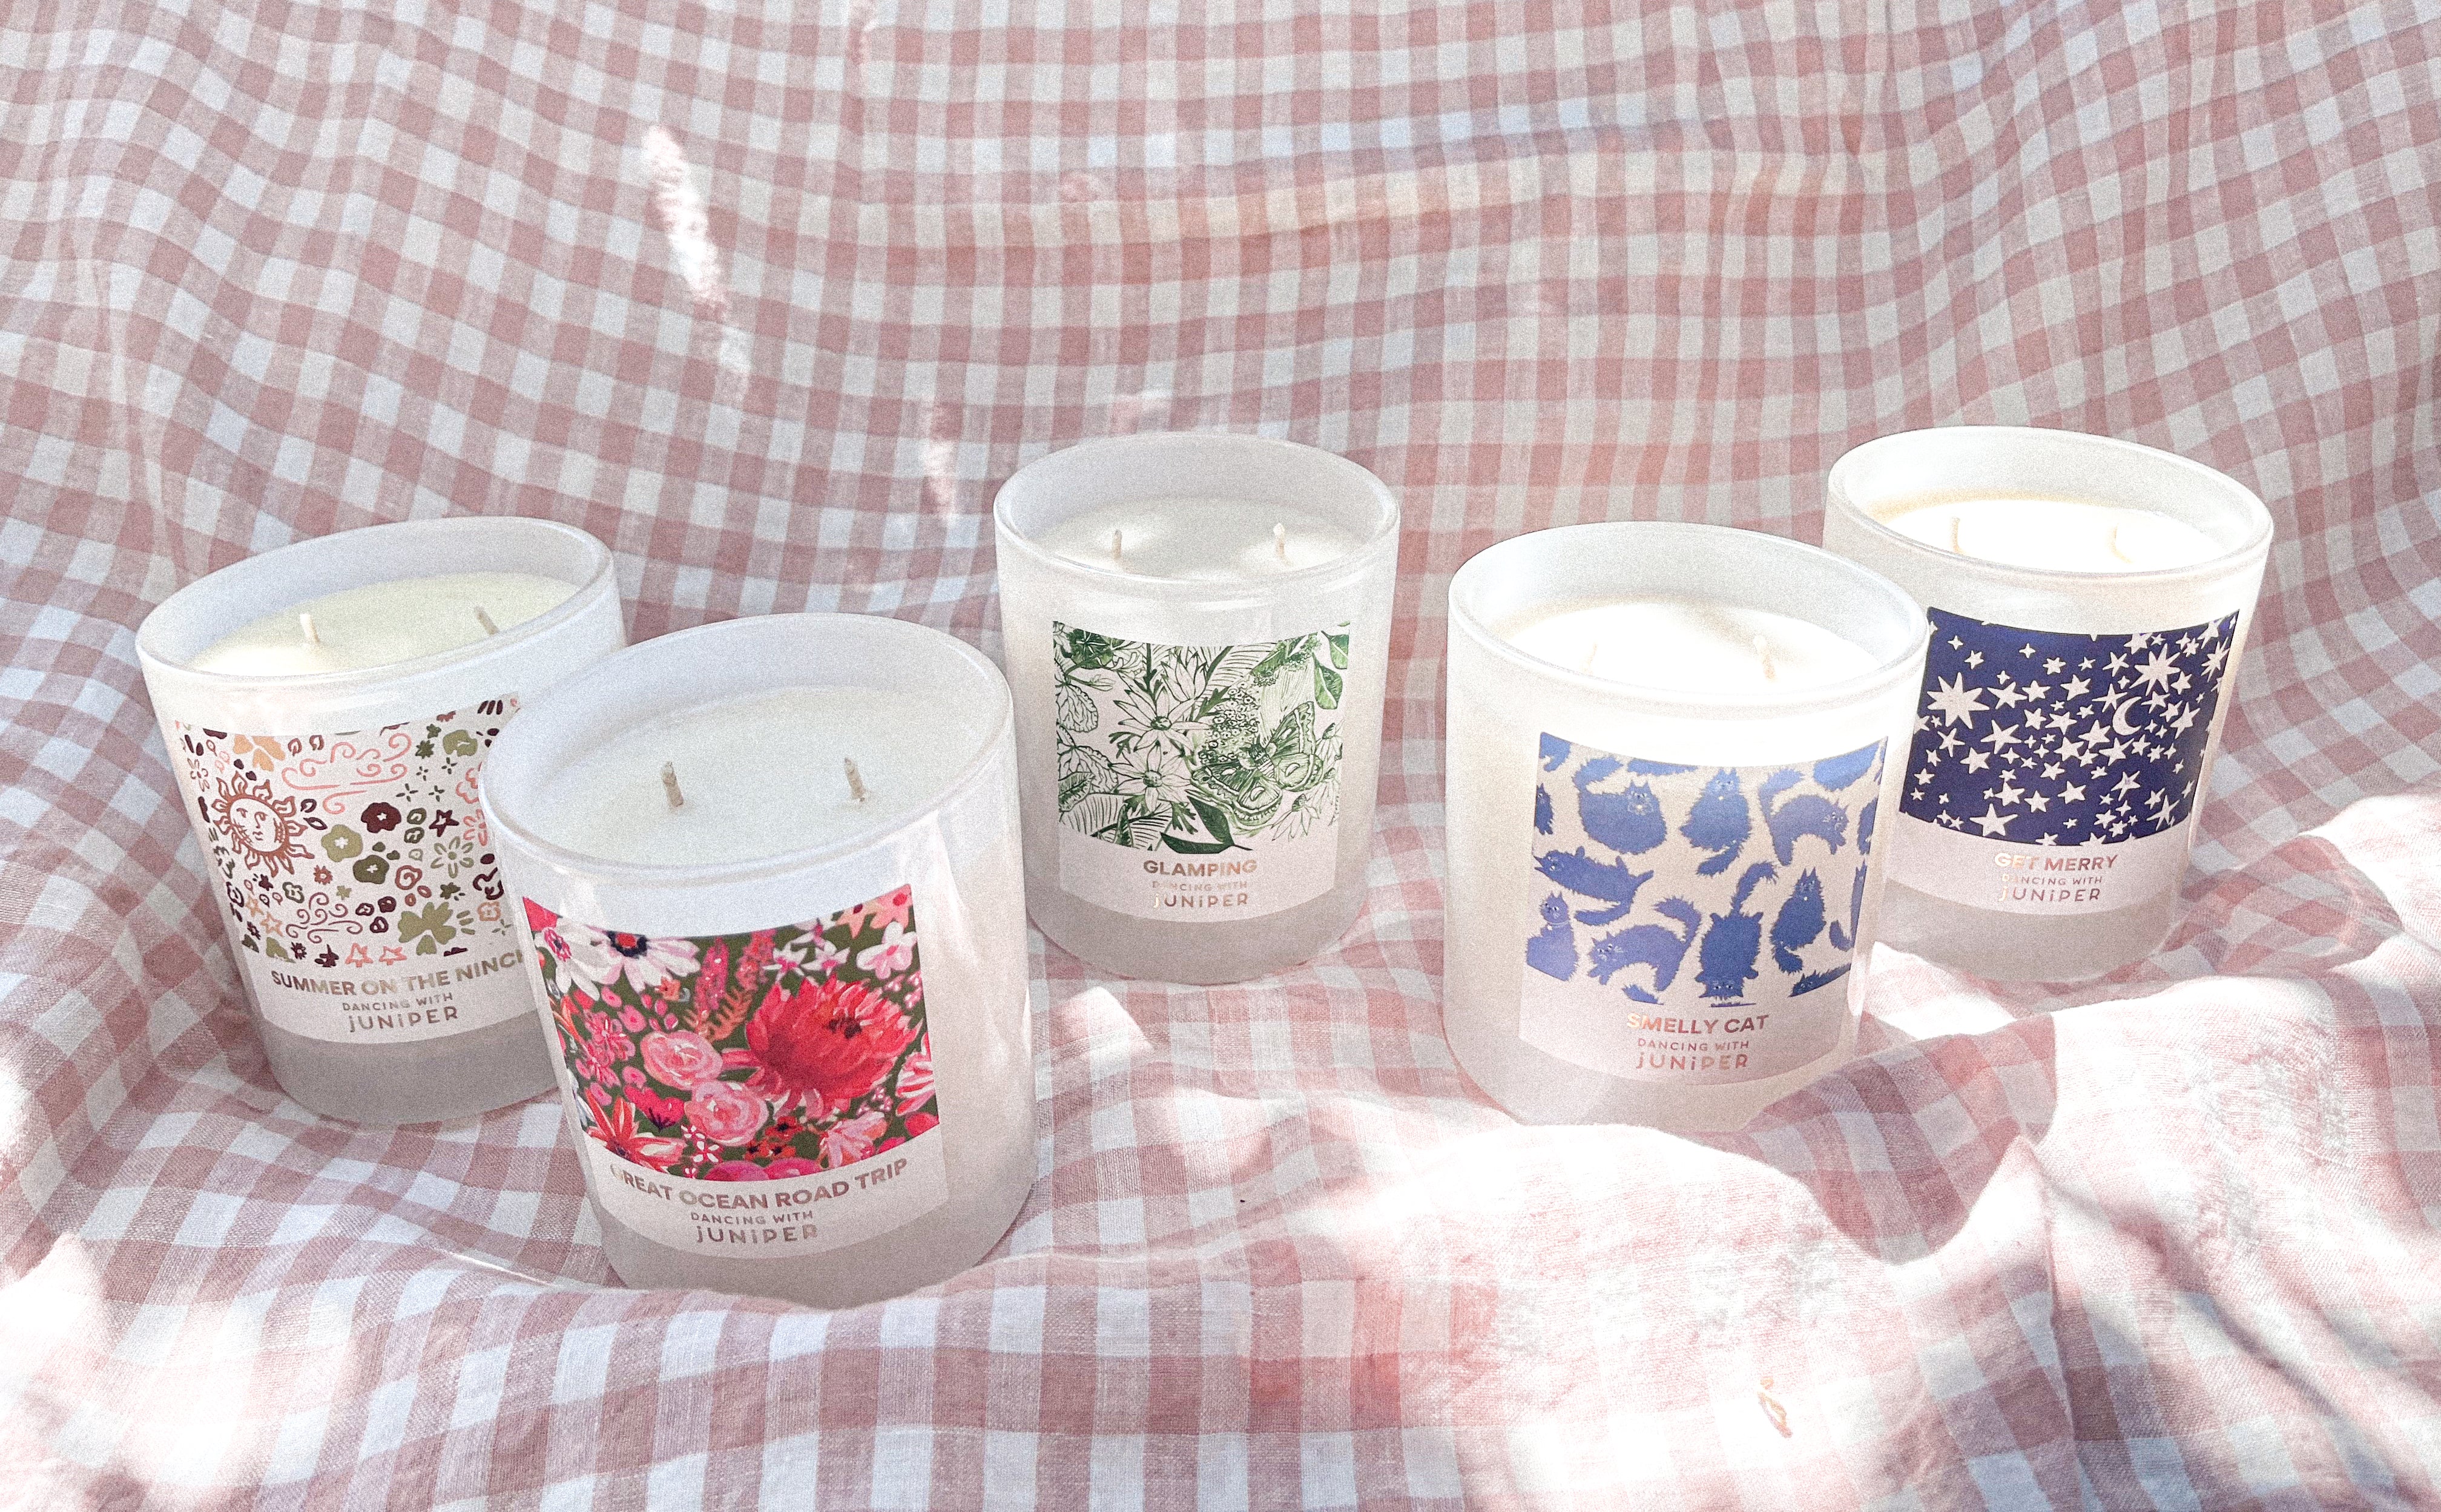 New lead free cotton wick scented soy candle collection with pretty artist designed packaging on gingham backdrop